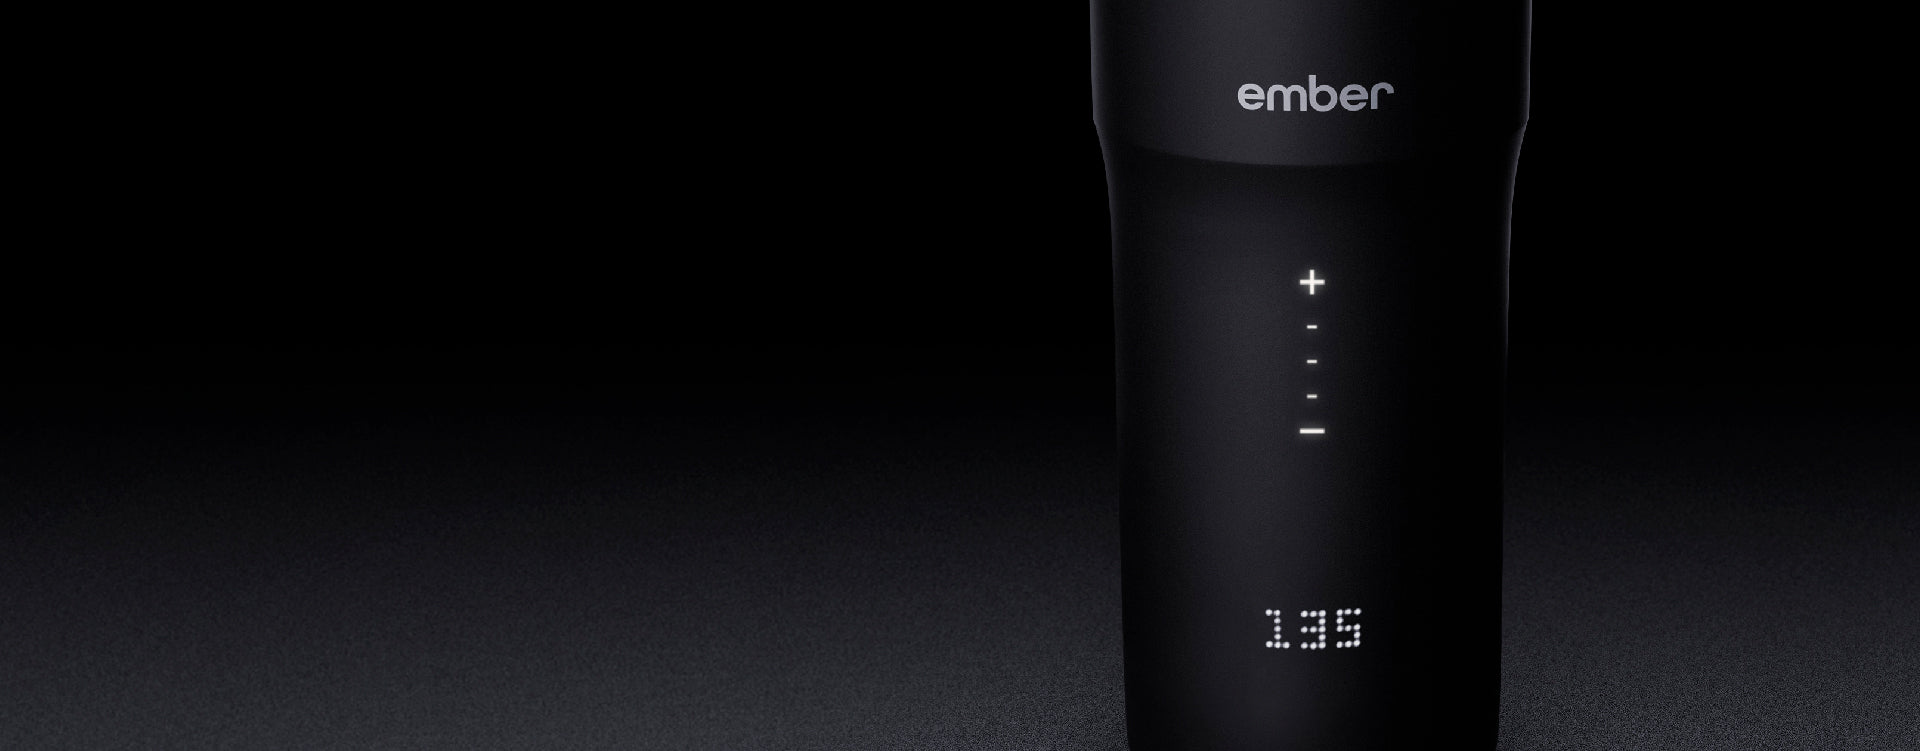 The Ember Travel Mug can keep your drink at the perfect temperature -  Reviewed